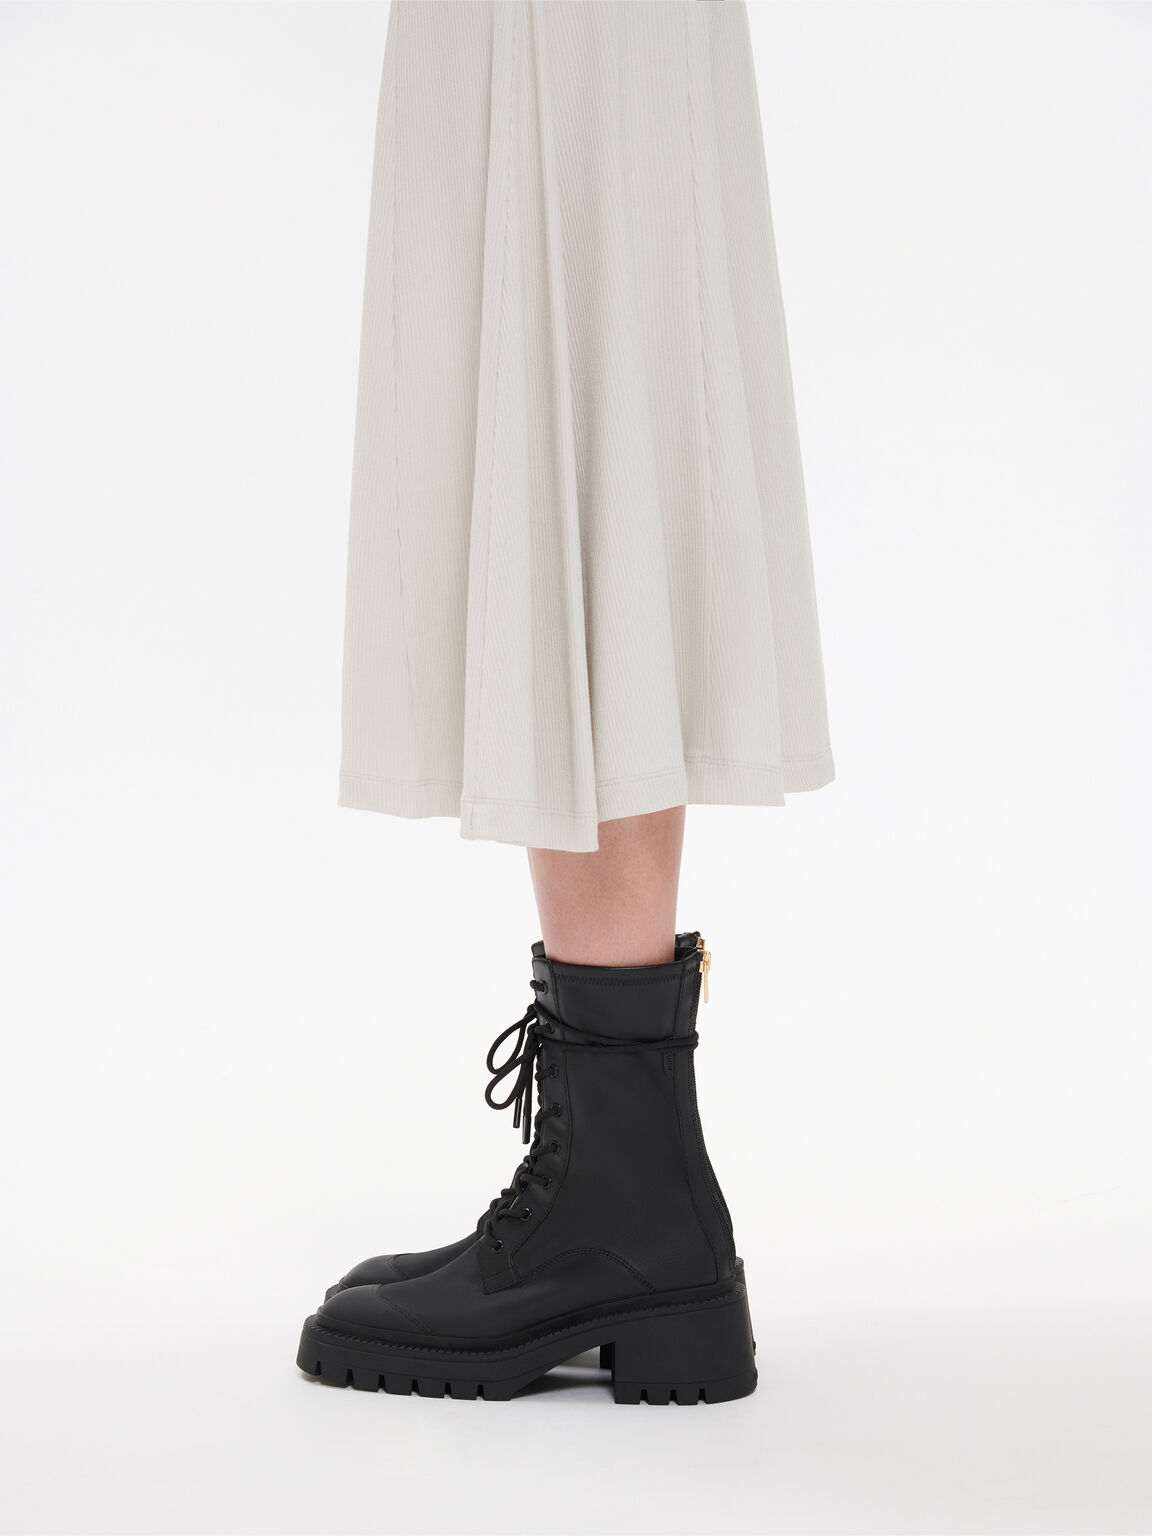 Poppy Ankle Boots, Black